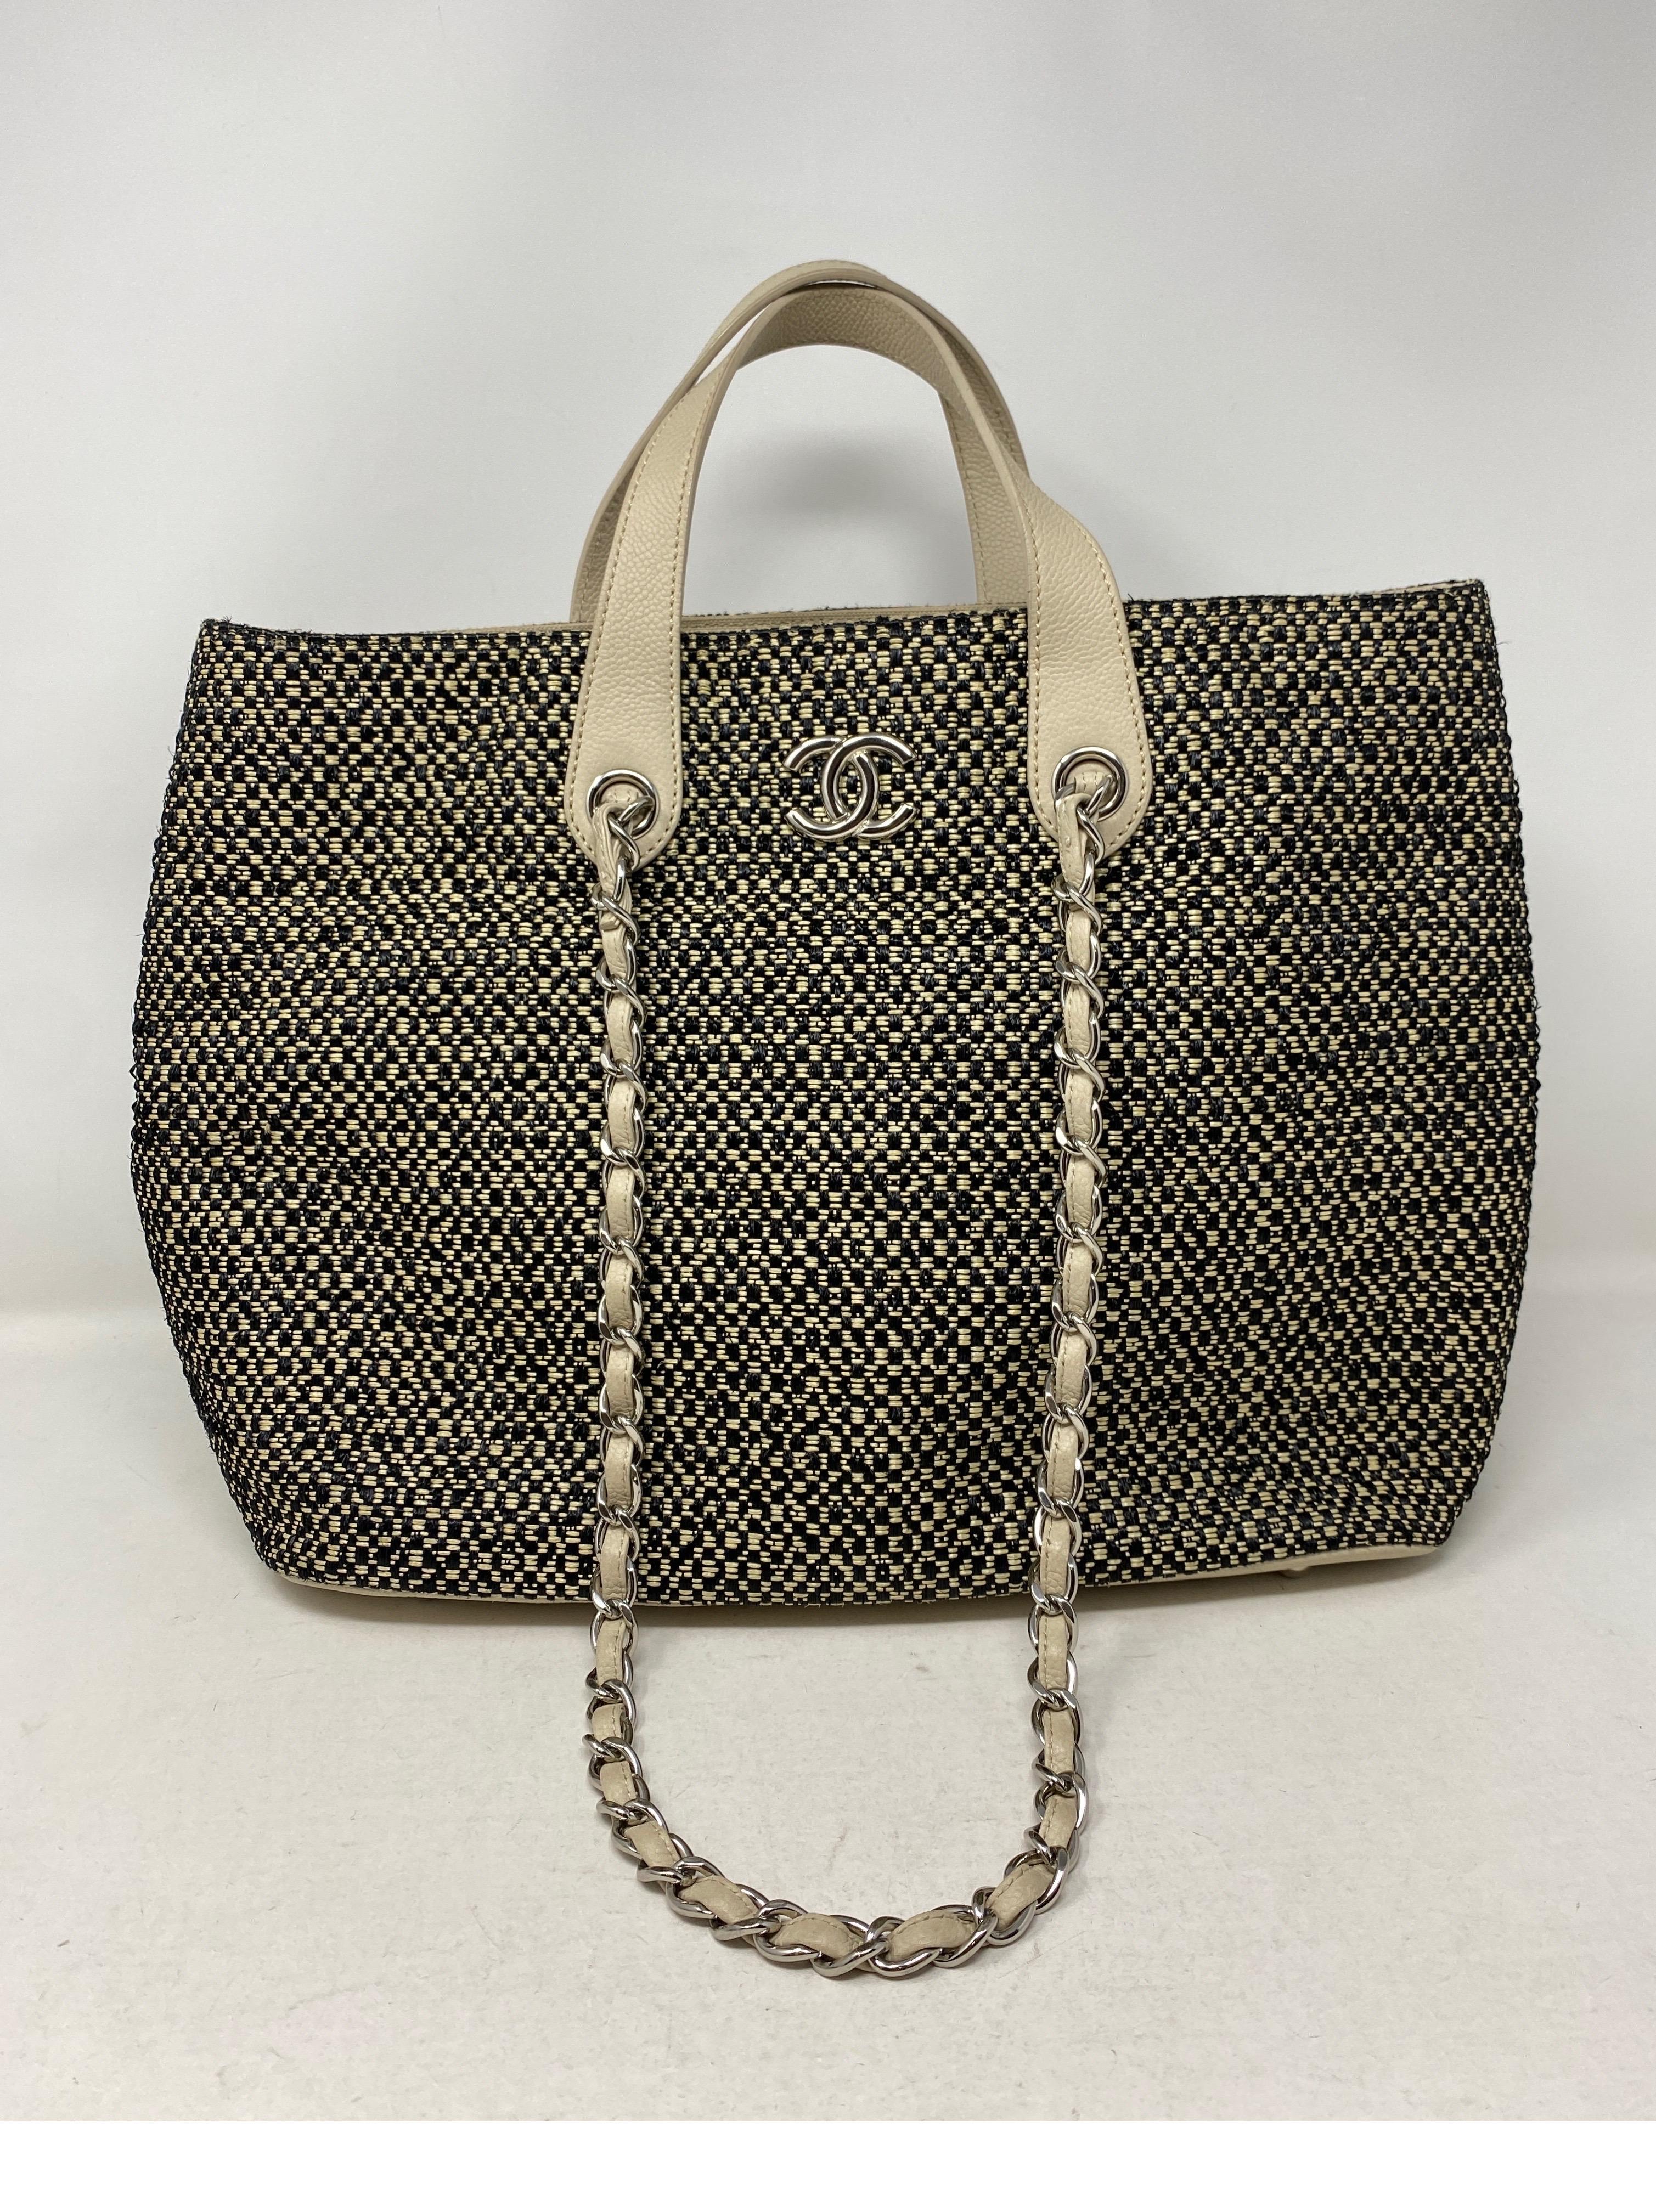 Chanel Tweed Cotton Tote Bag. Excellent like new condition. Leather straps and handles. Top can be adjusted like a bucket bag. Versatile bag. Unique style. Authenticity card and dust cover included. Guaranteed authentic. 